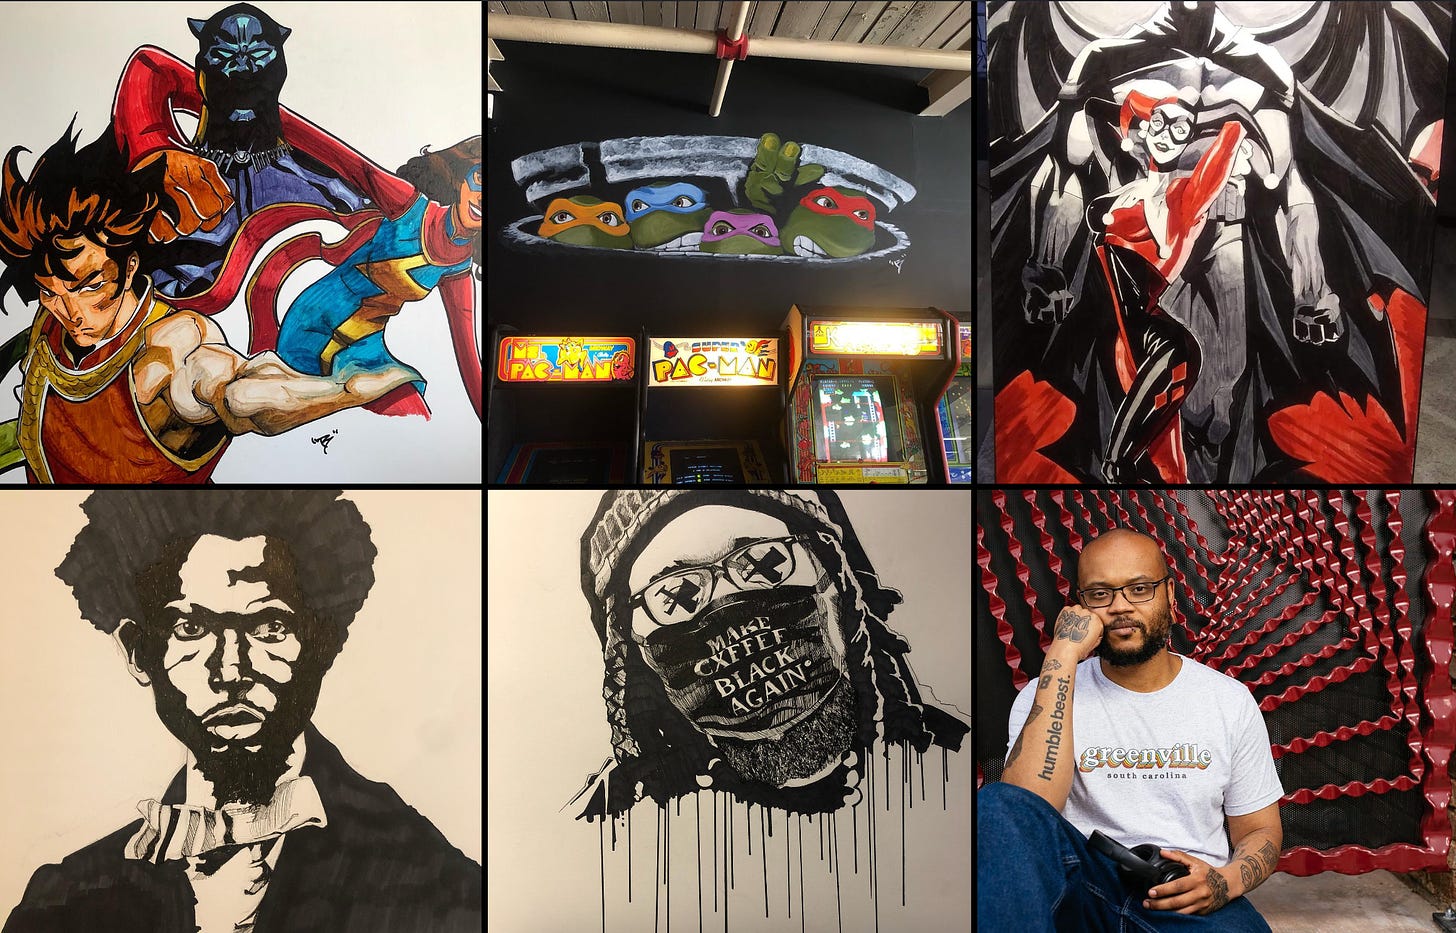 A collage of painted and drawn art portraits of comic book characters and black activists. In the lower right is a portrait of the artist.